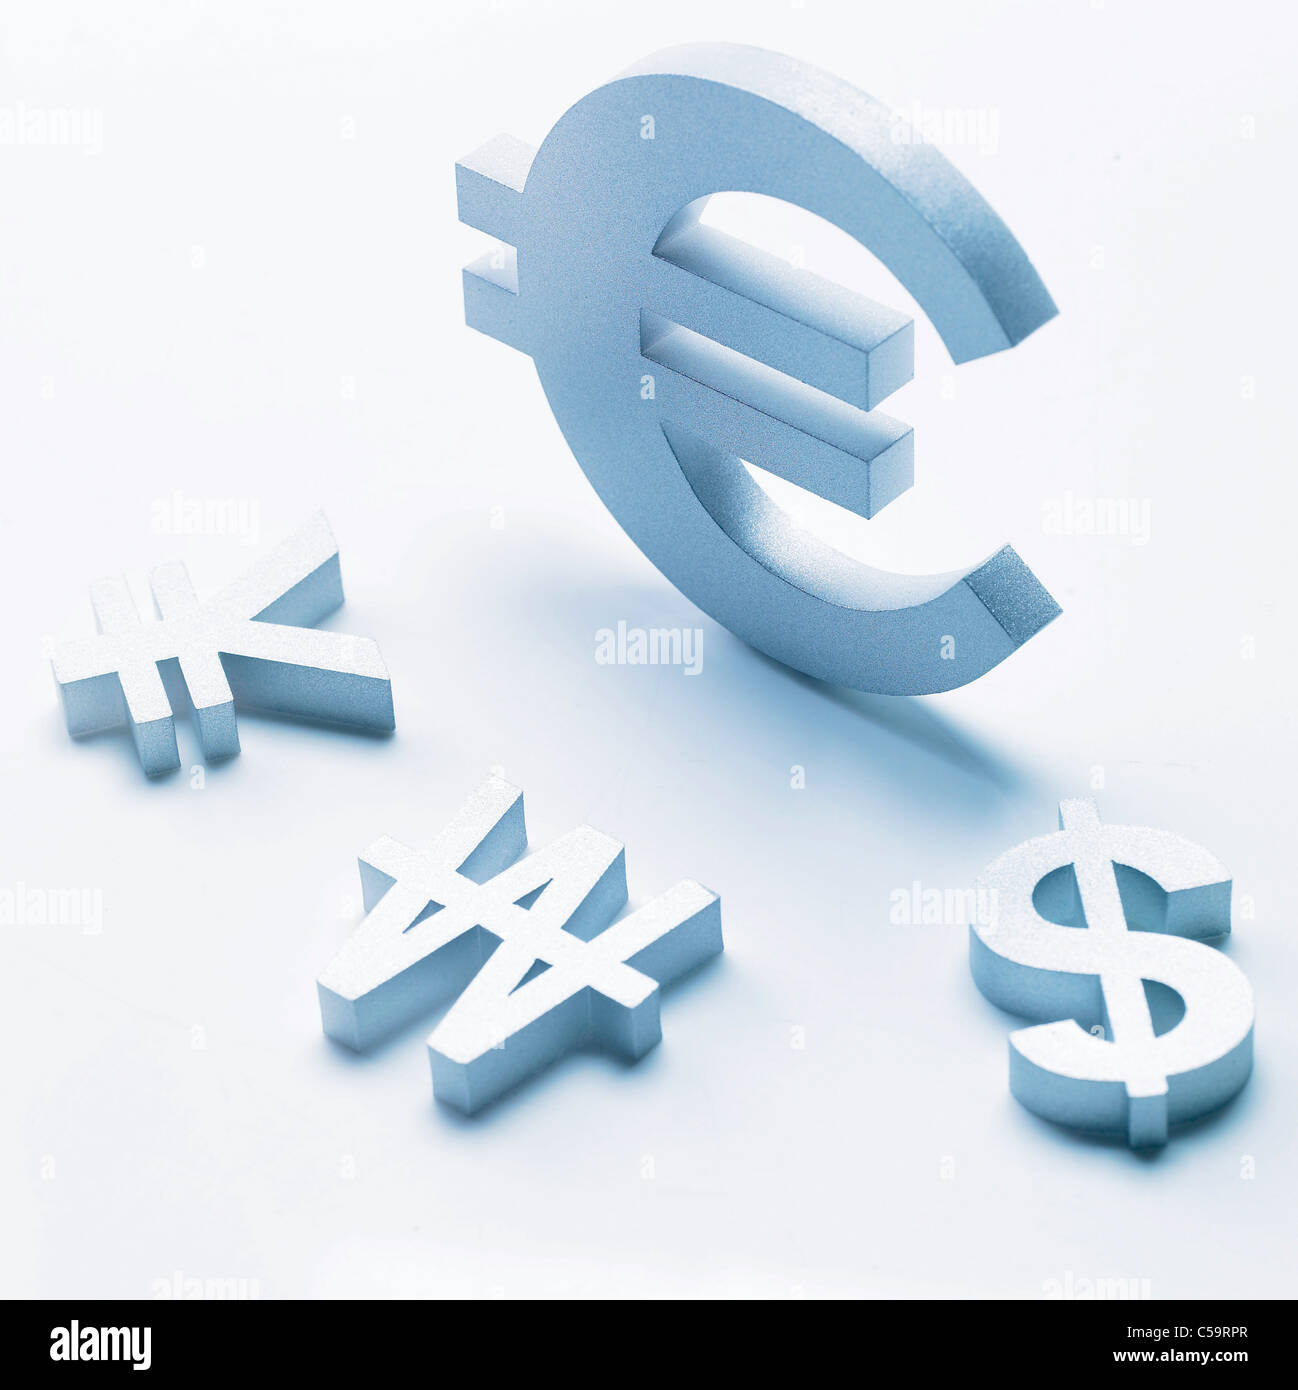 Close-up of Variety of currency symbols Stock Photo